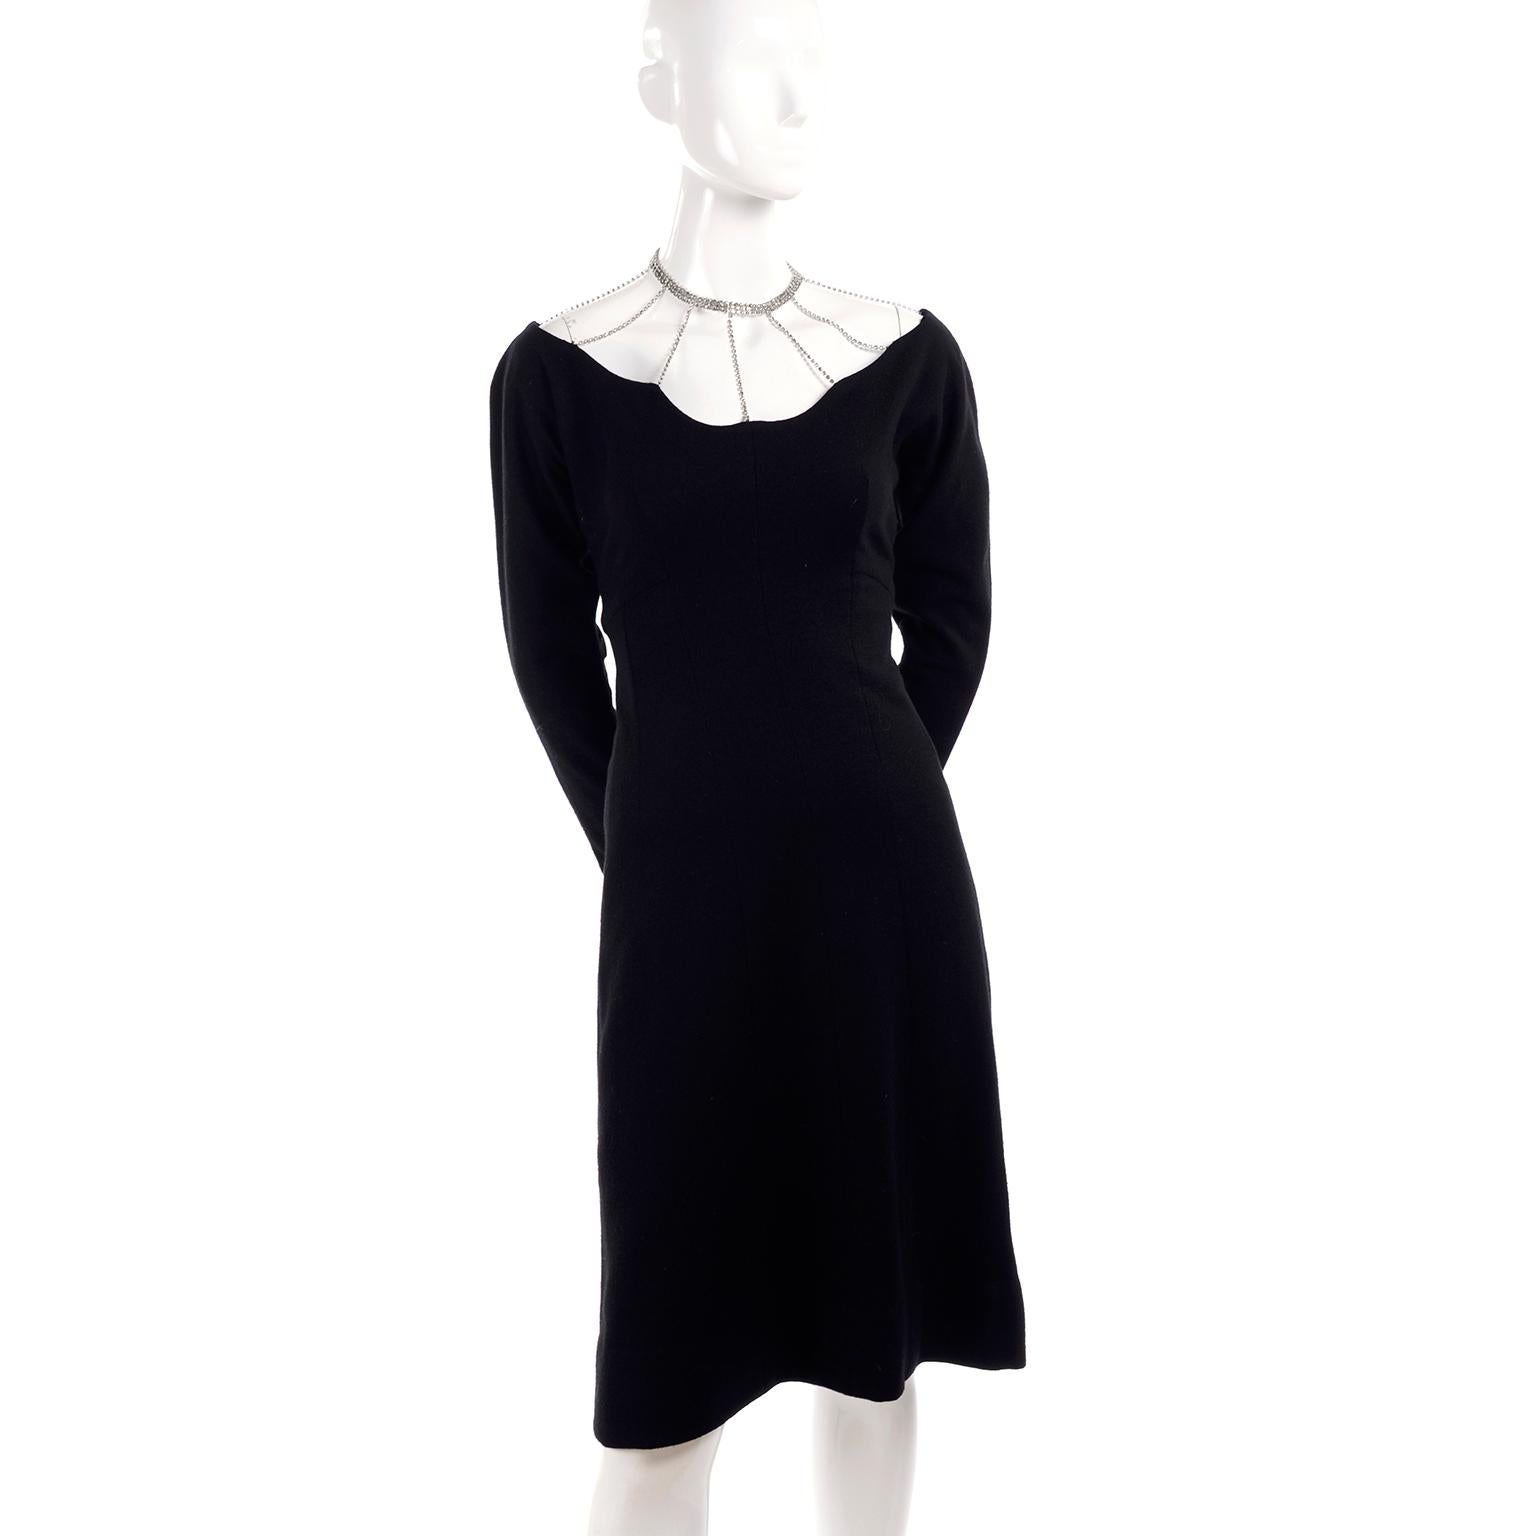 Marion McCoy Little Black Vintage Dress With Rhinestone Necklace Collar, 1960s  6